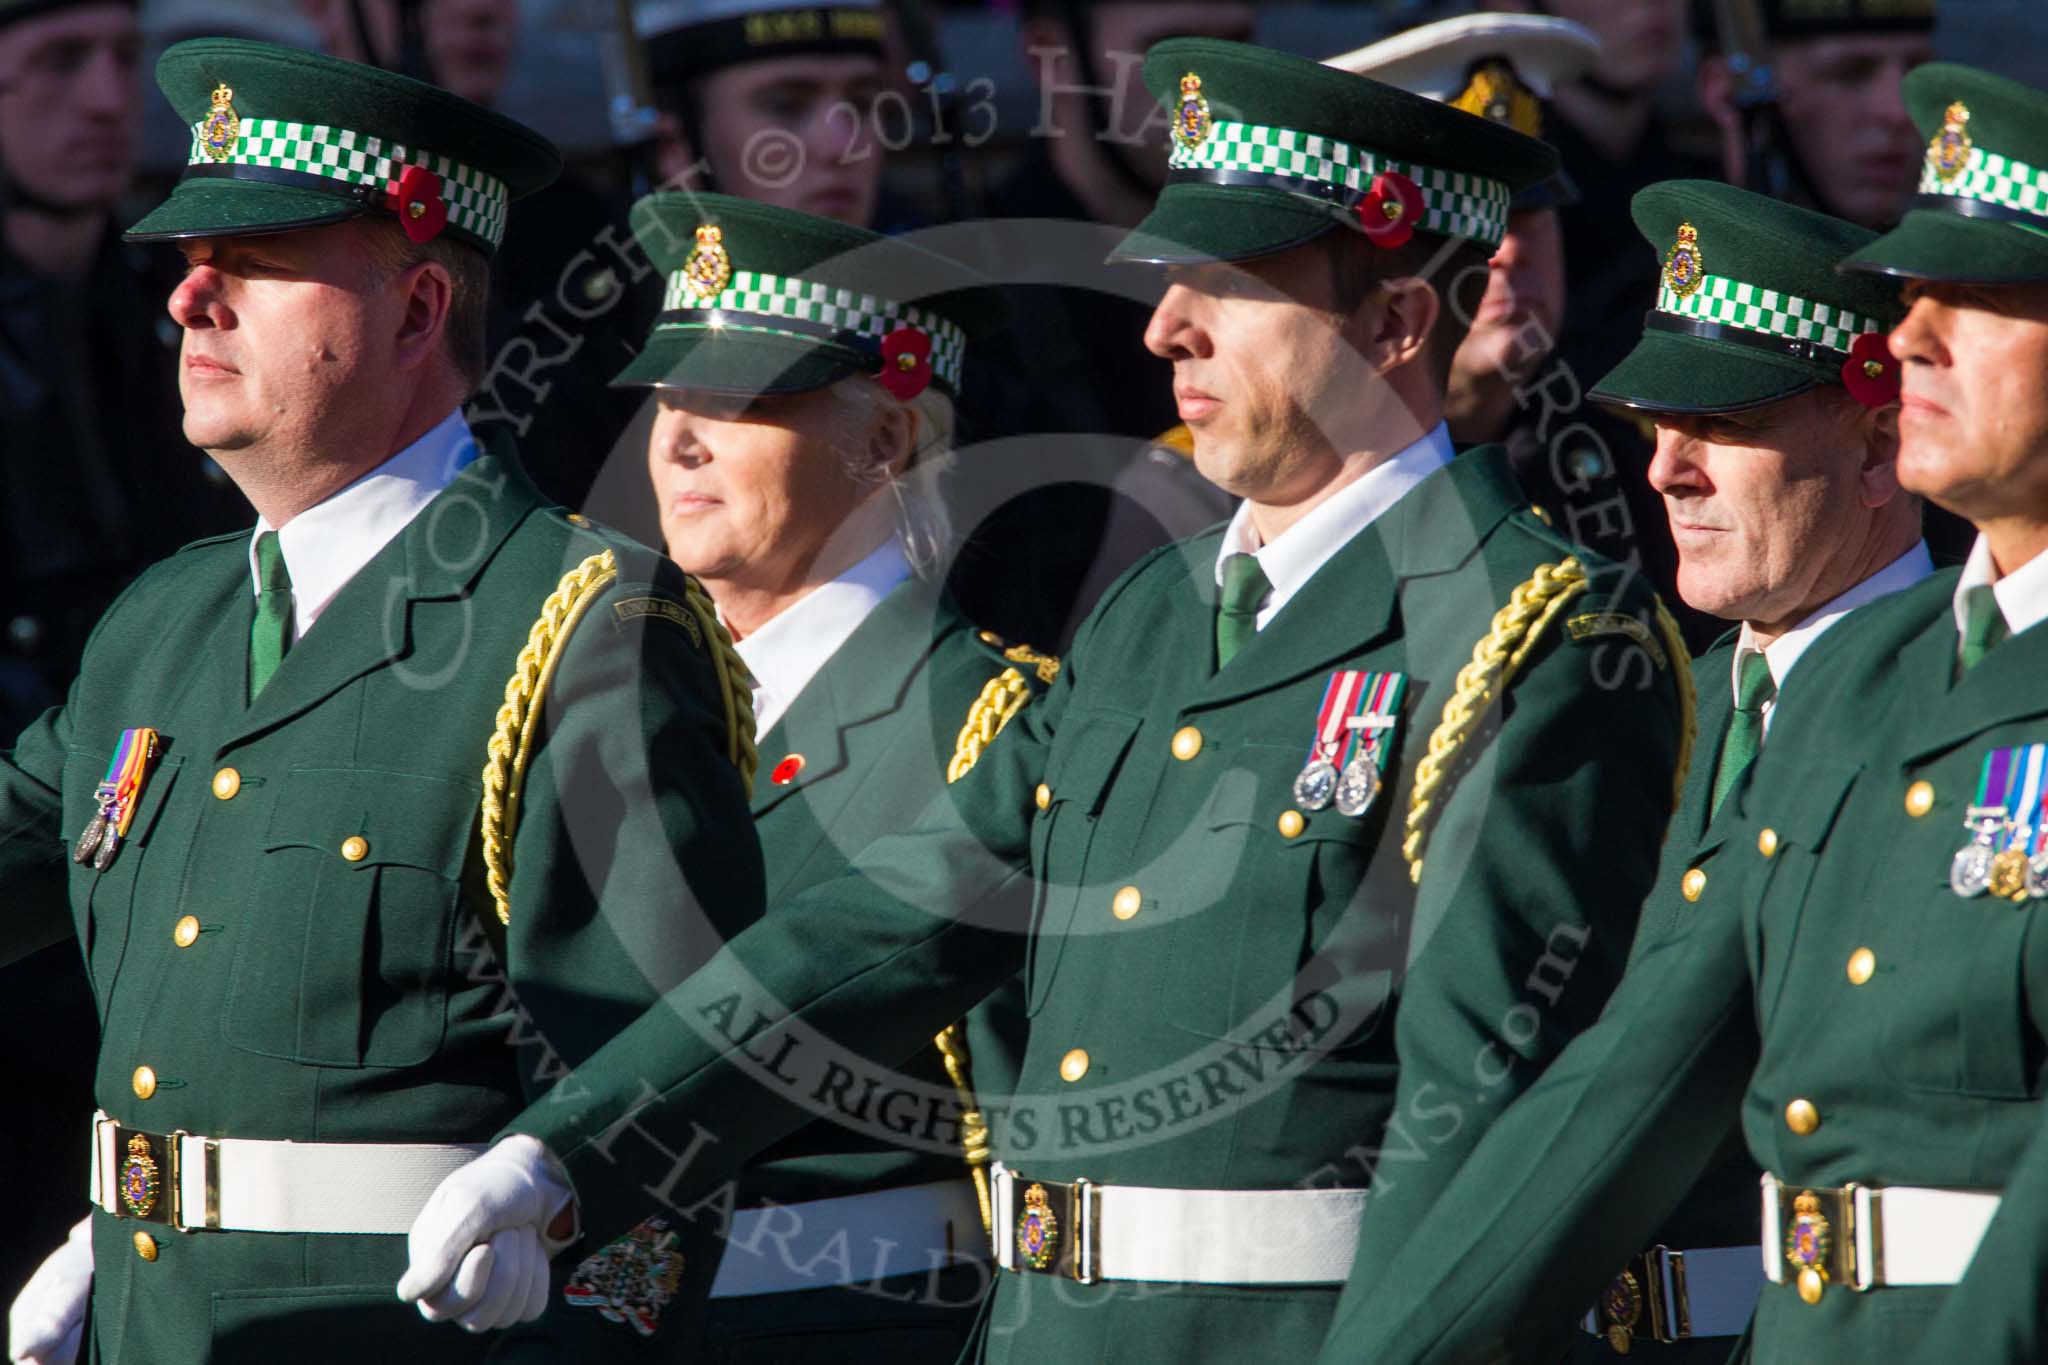 Remembrance Sunday at the Cenotaph in London 2014: Group M13 - London Ambulance Service NHS Trust.
Press stand opposite the Foreign Office building, Whitehall, London SW1,
London,
Greater London,
United Kingdom,
on 09 November 2014 at 12:16, image #2071